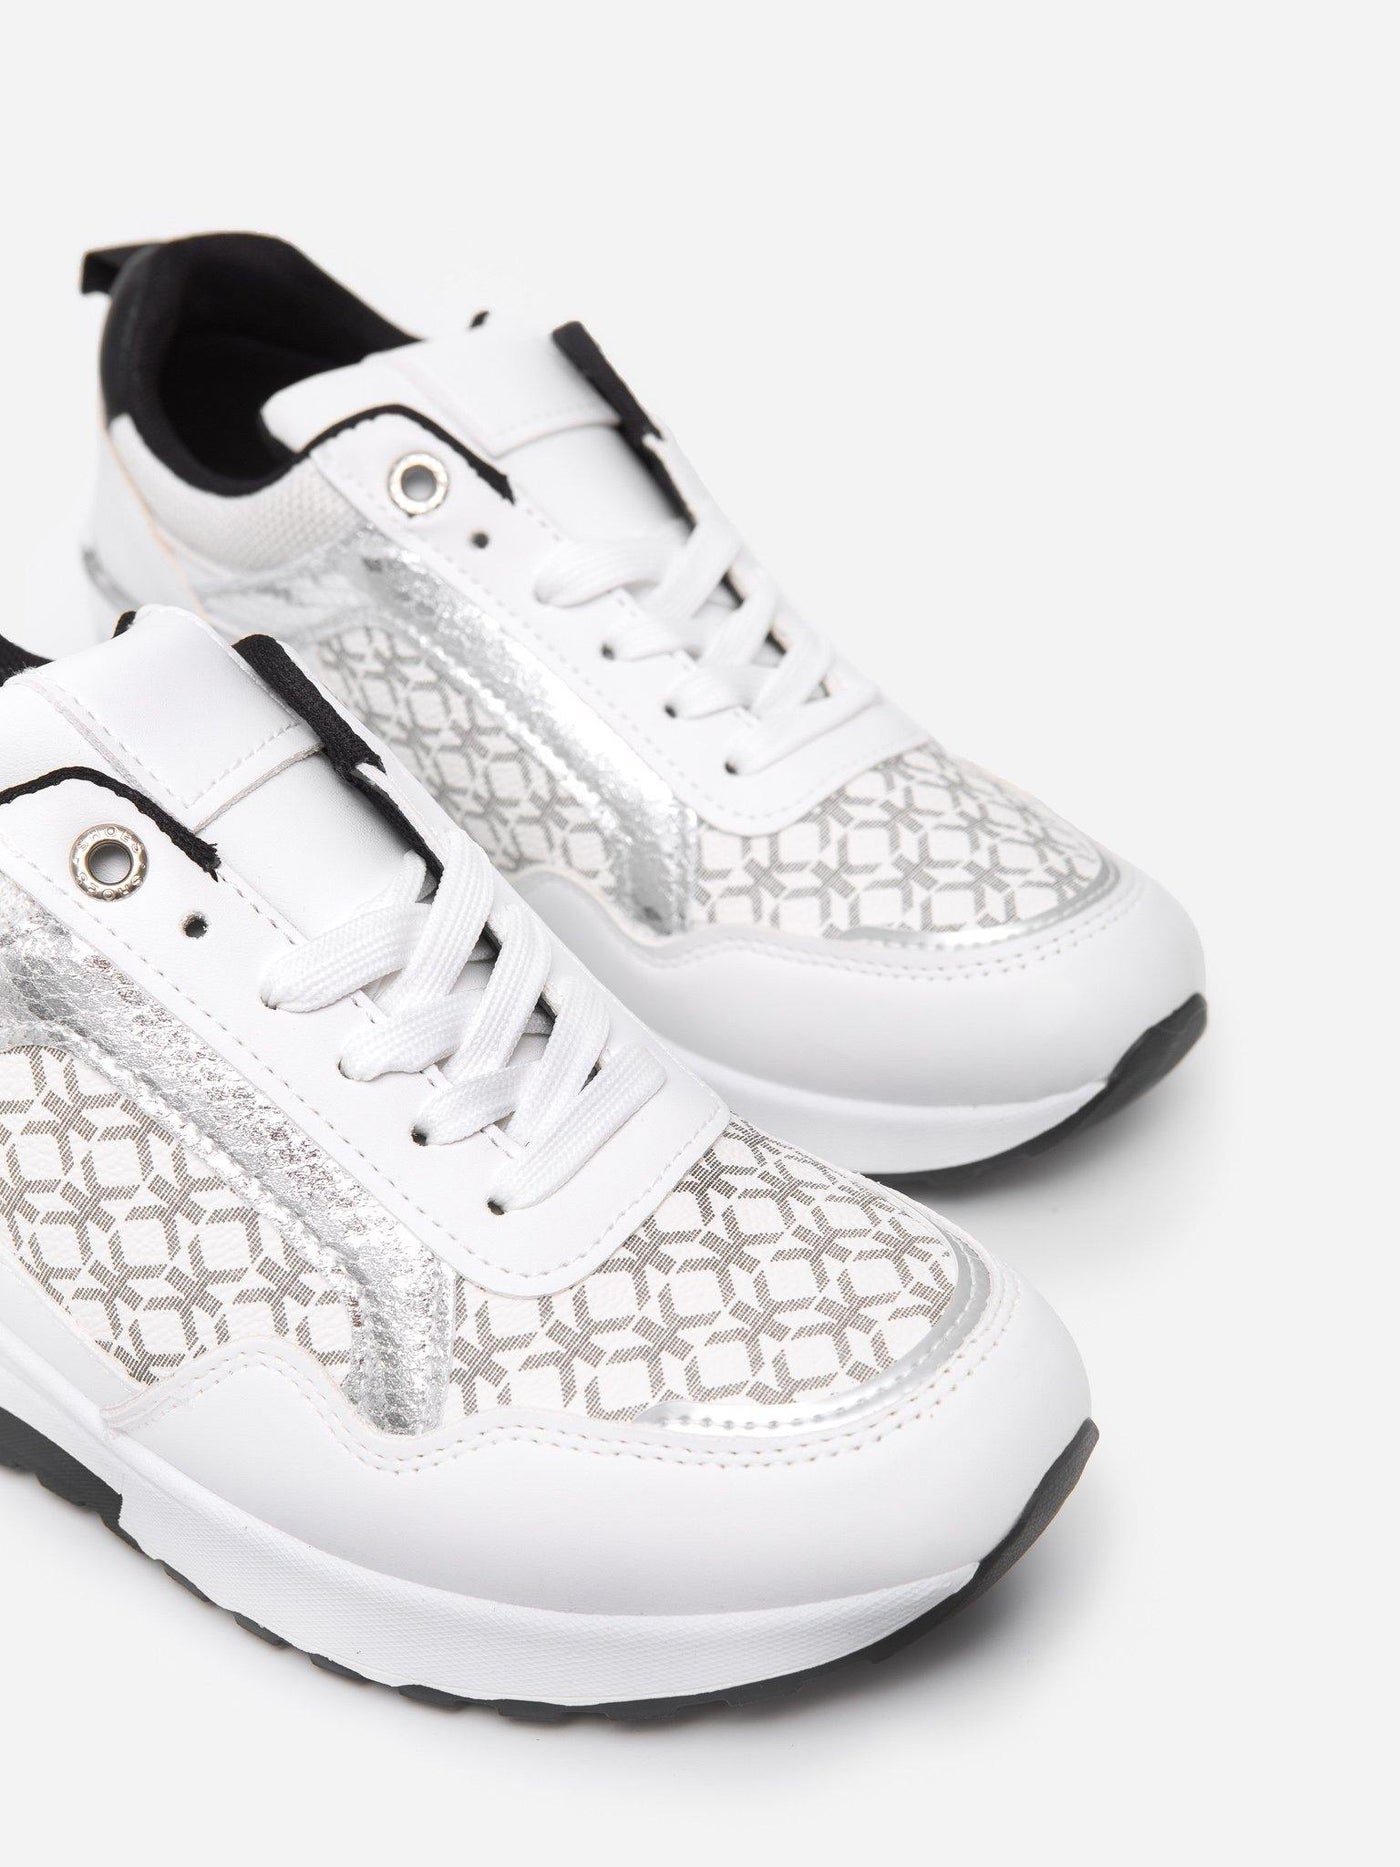 Sneaker Nature Cuña Blanco - MMShoes